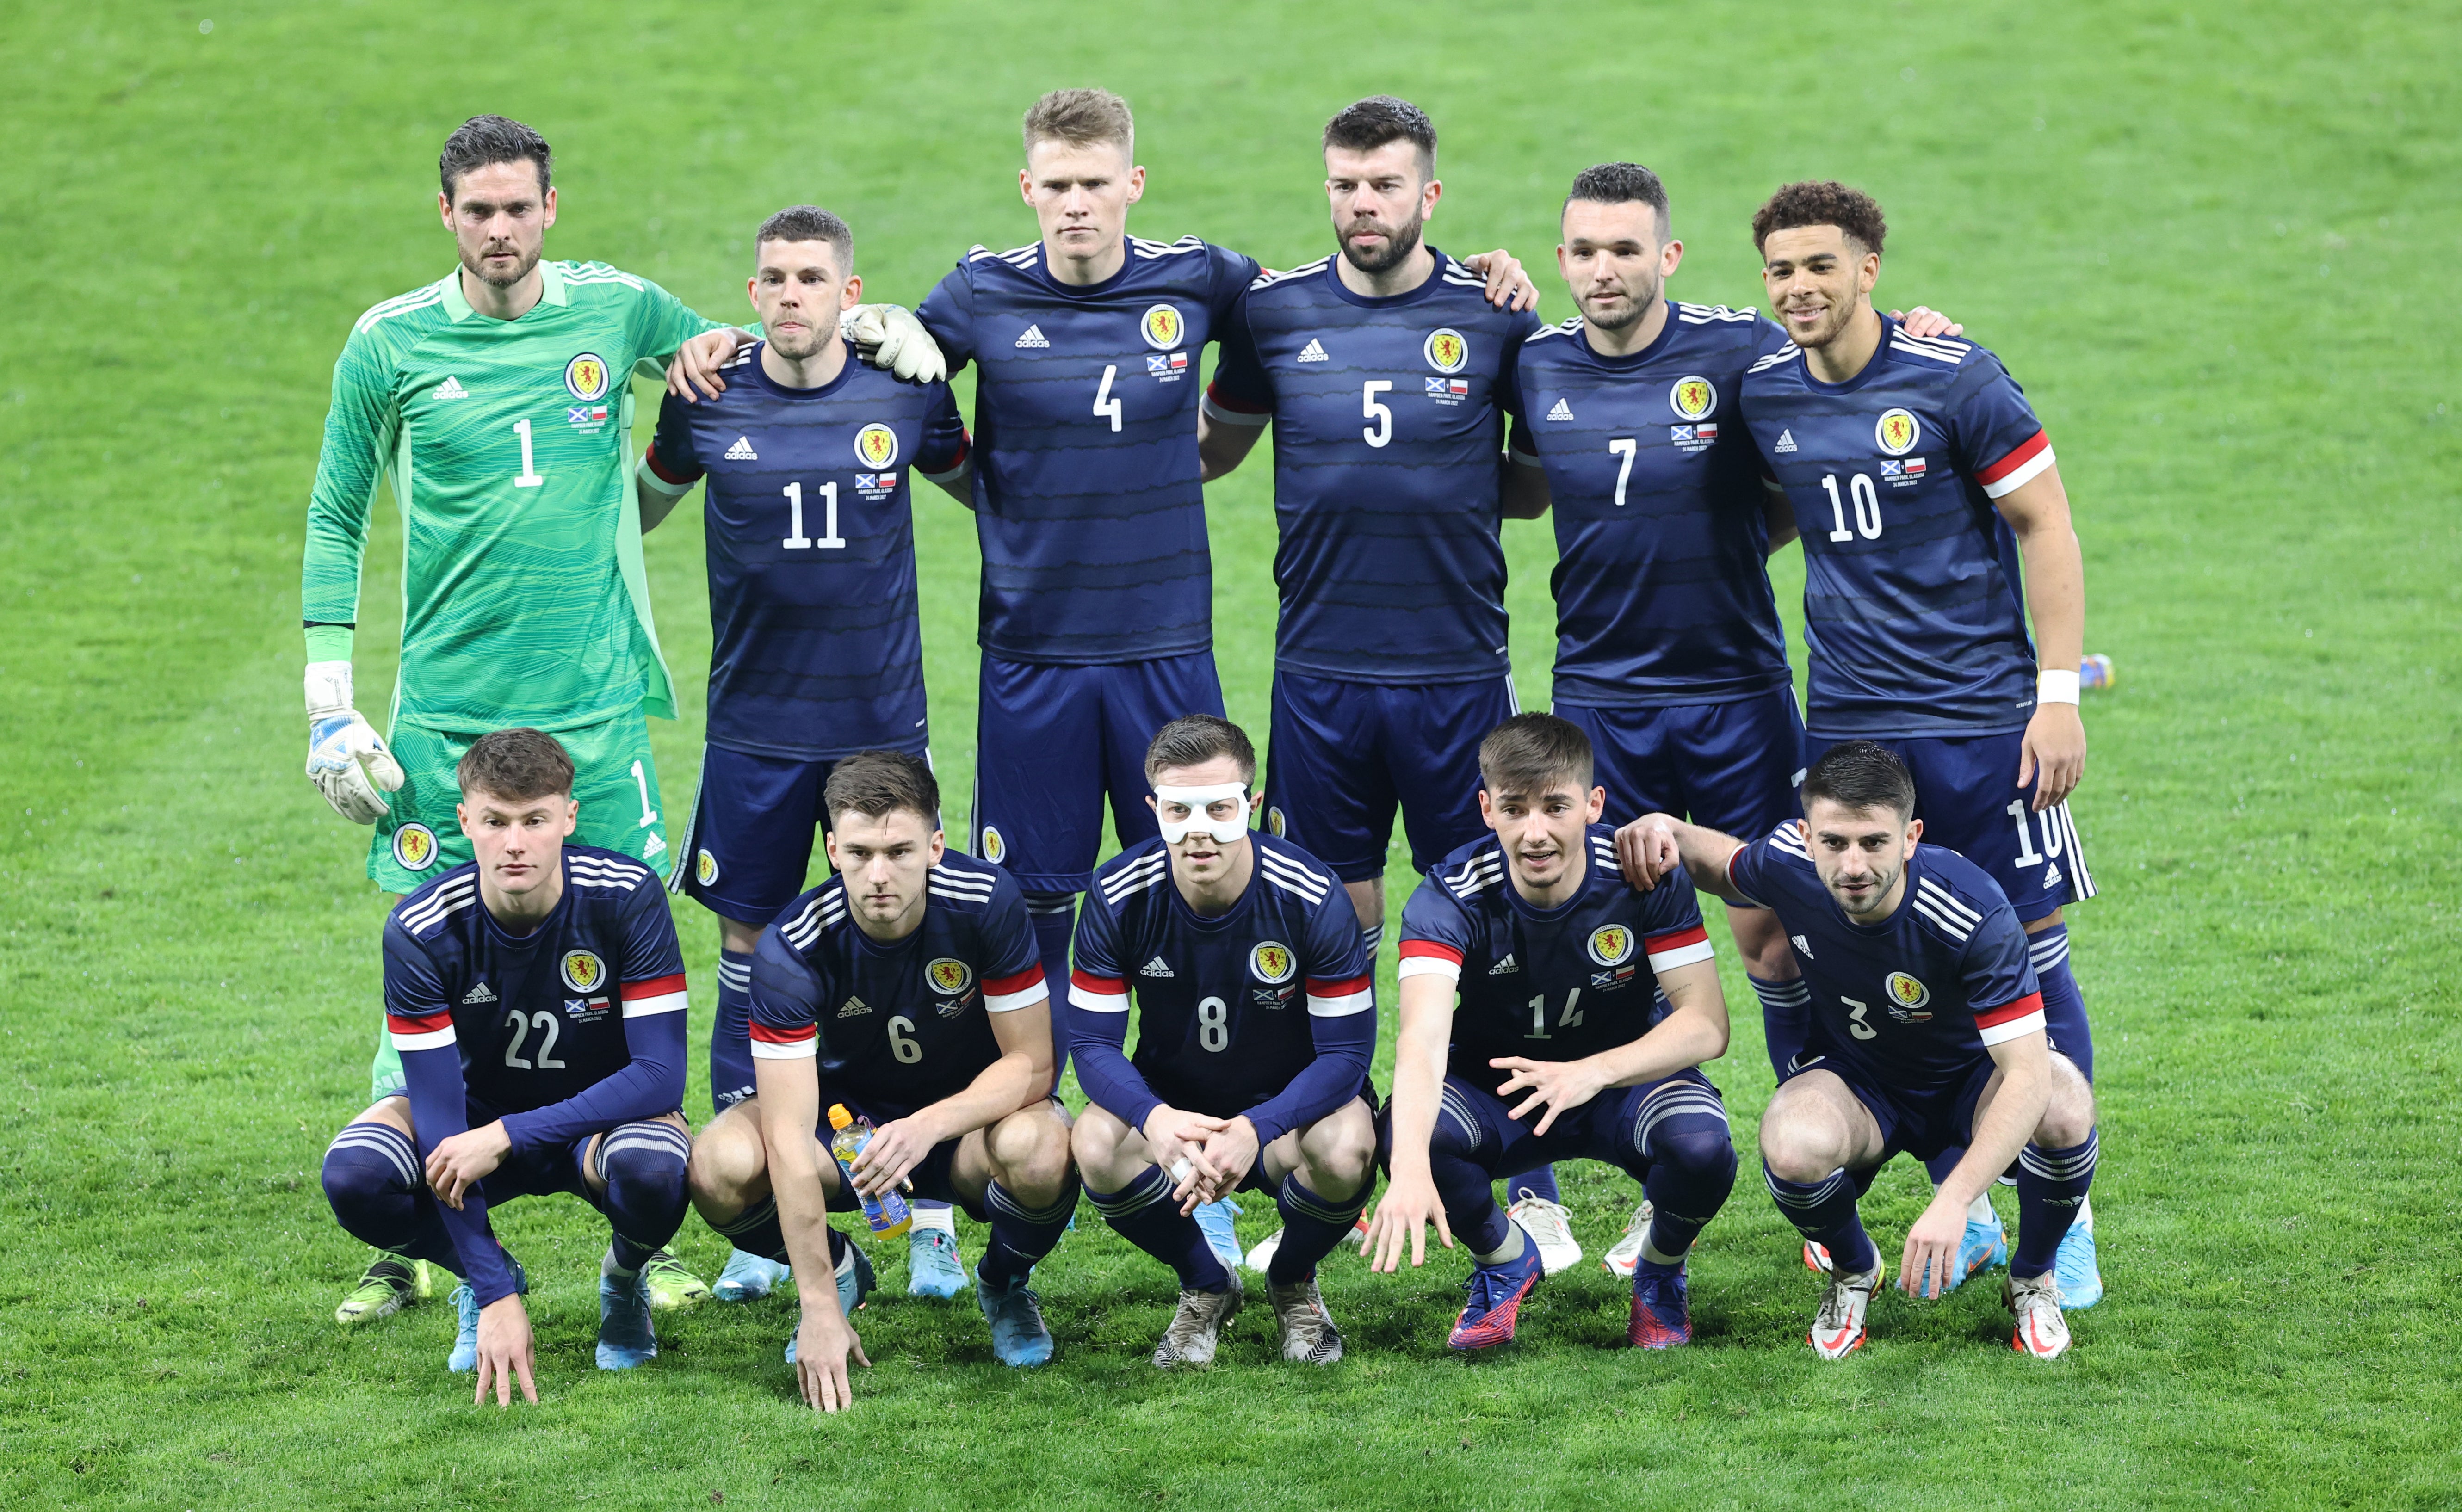 Scotland are out to keep their unbeaten run going (Steve Welsh/PA).